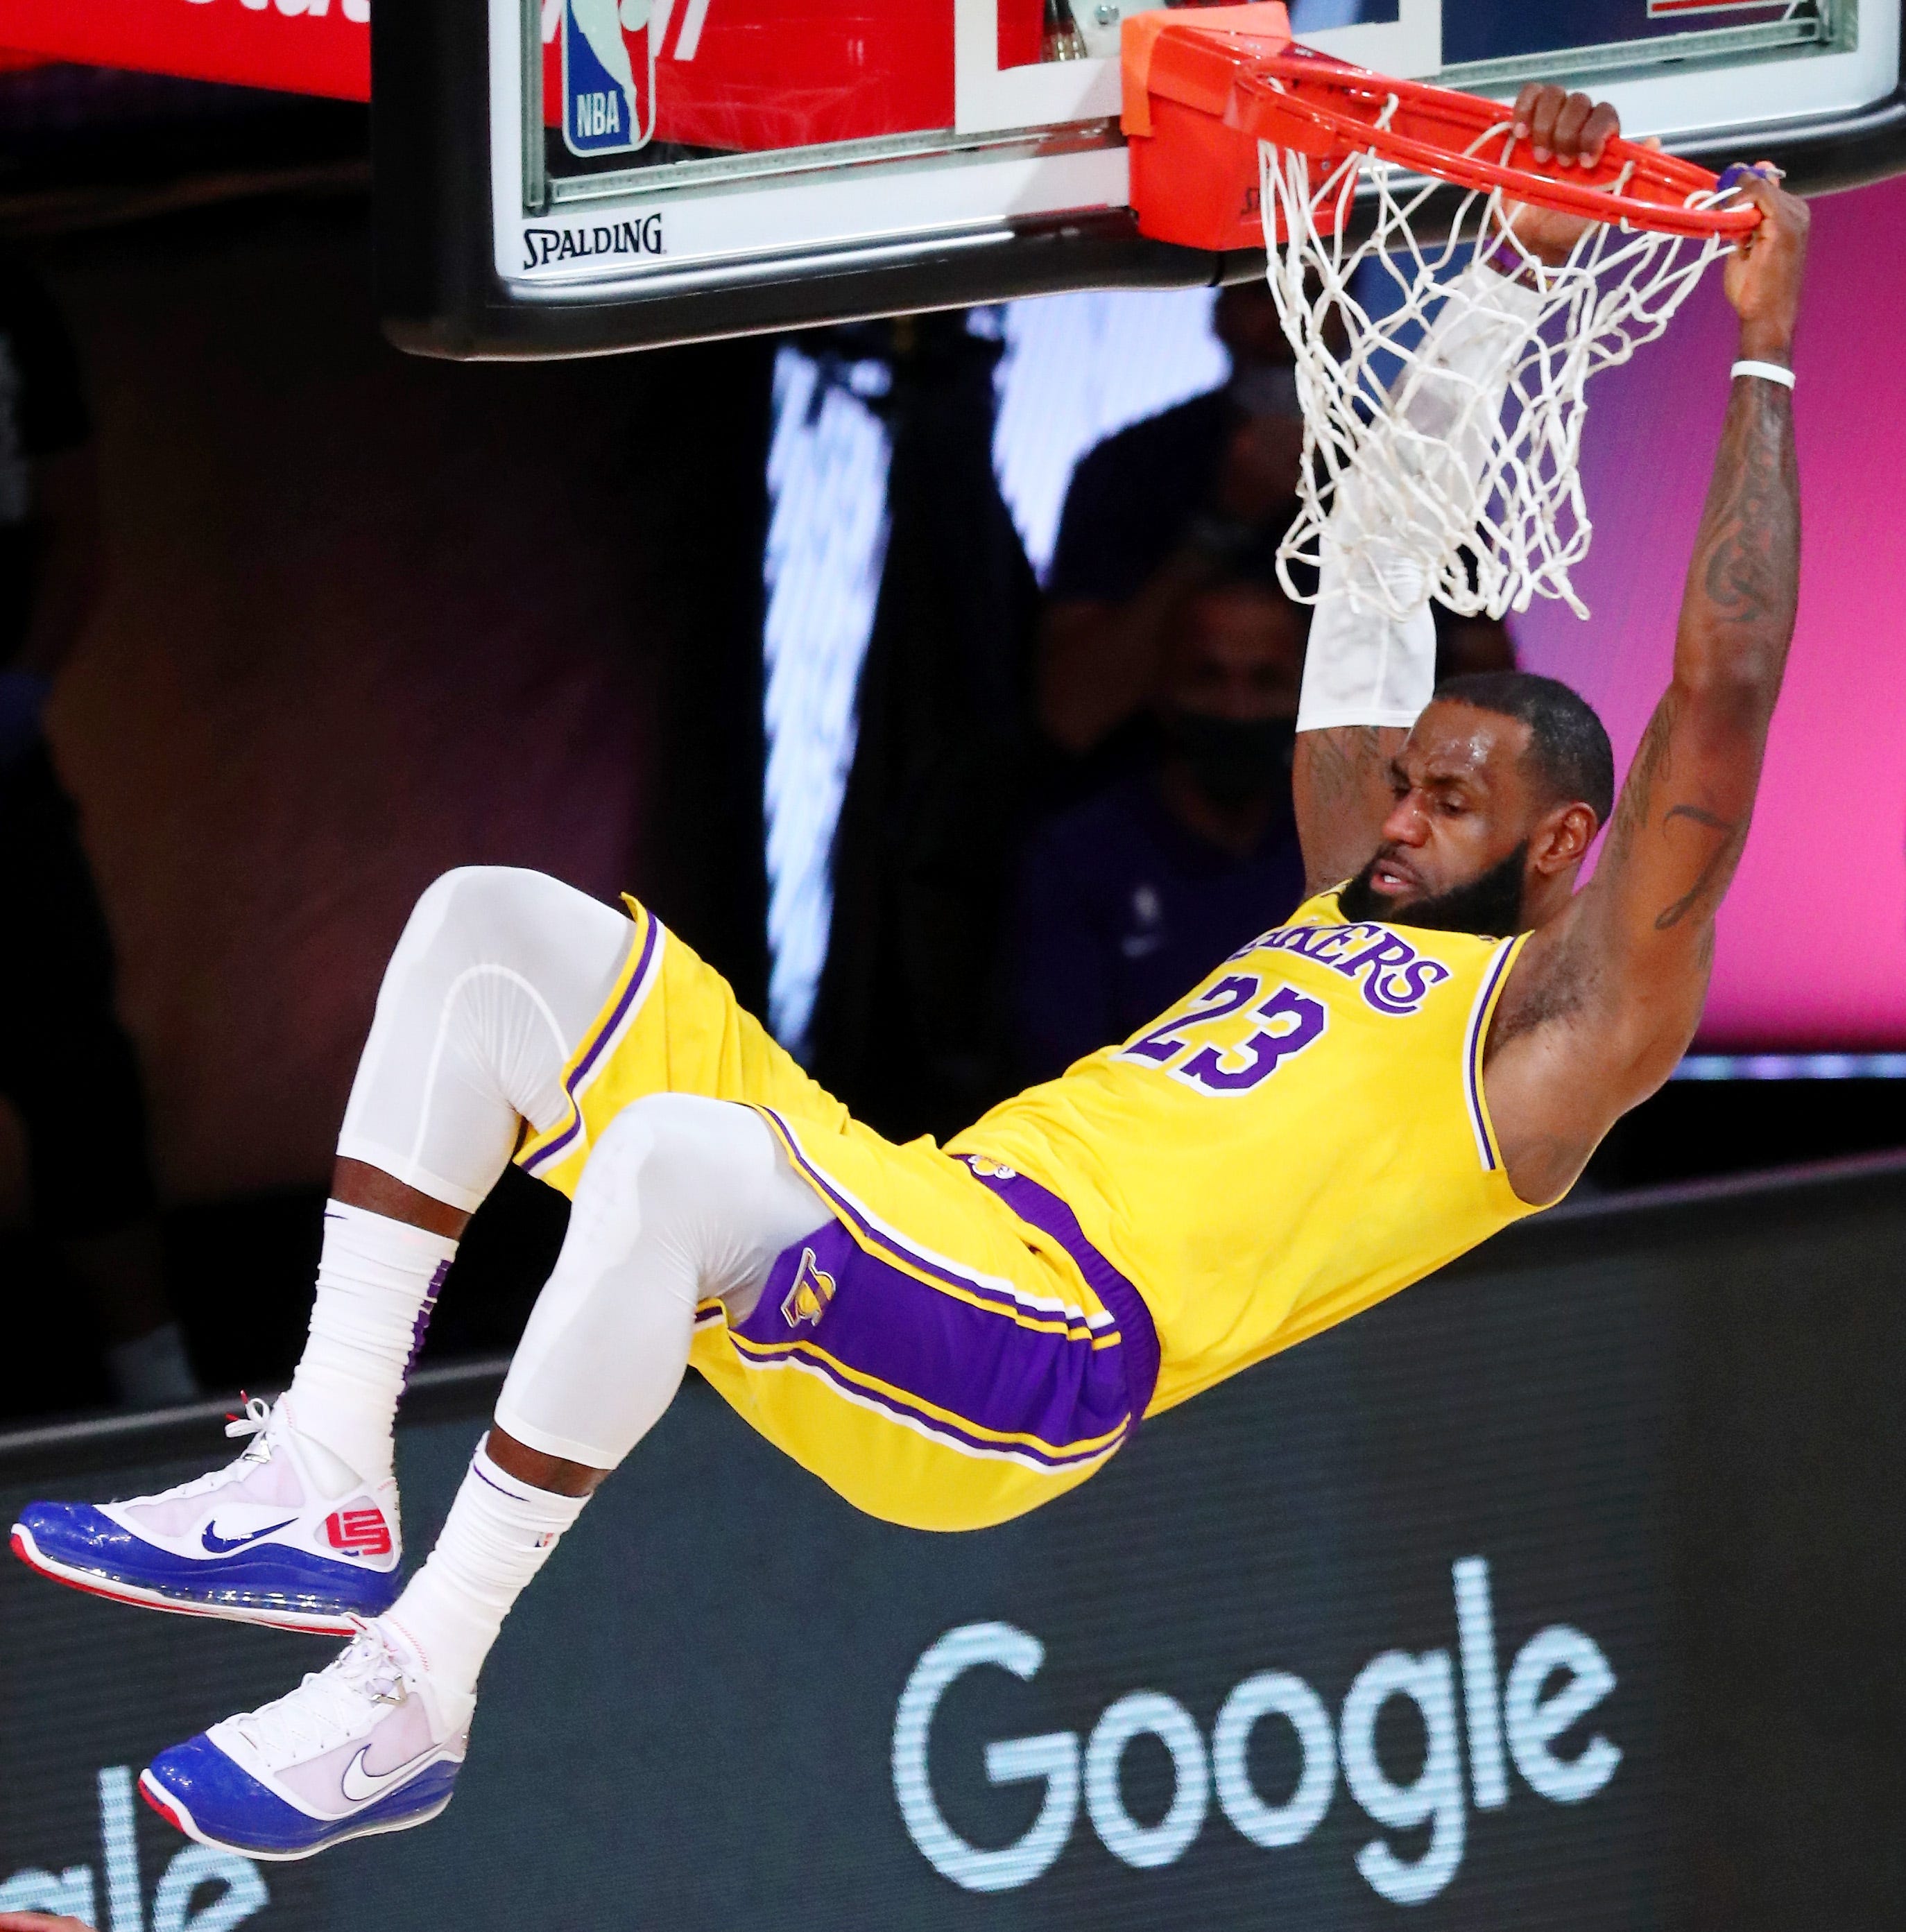 LeBron James has adapted his game during his 20-year NBA career, but a dunk remains a fan favorite.